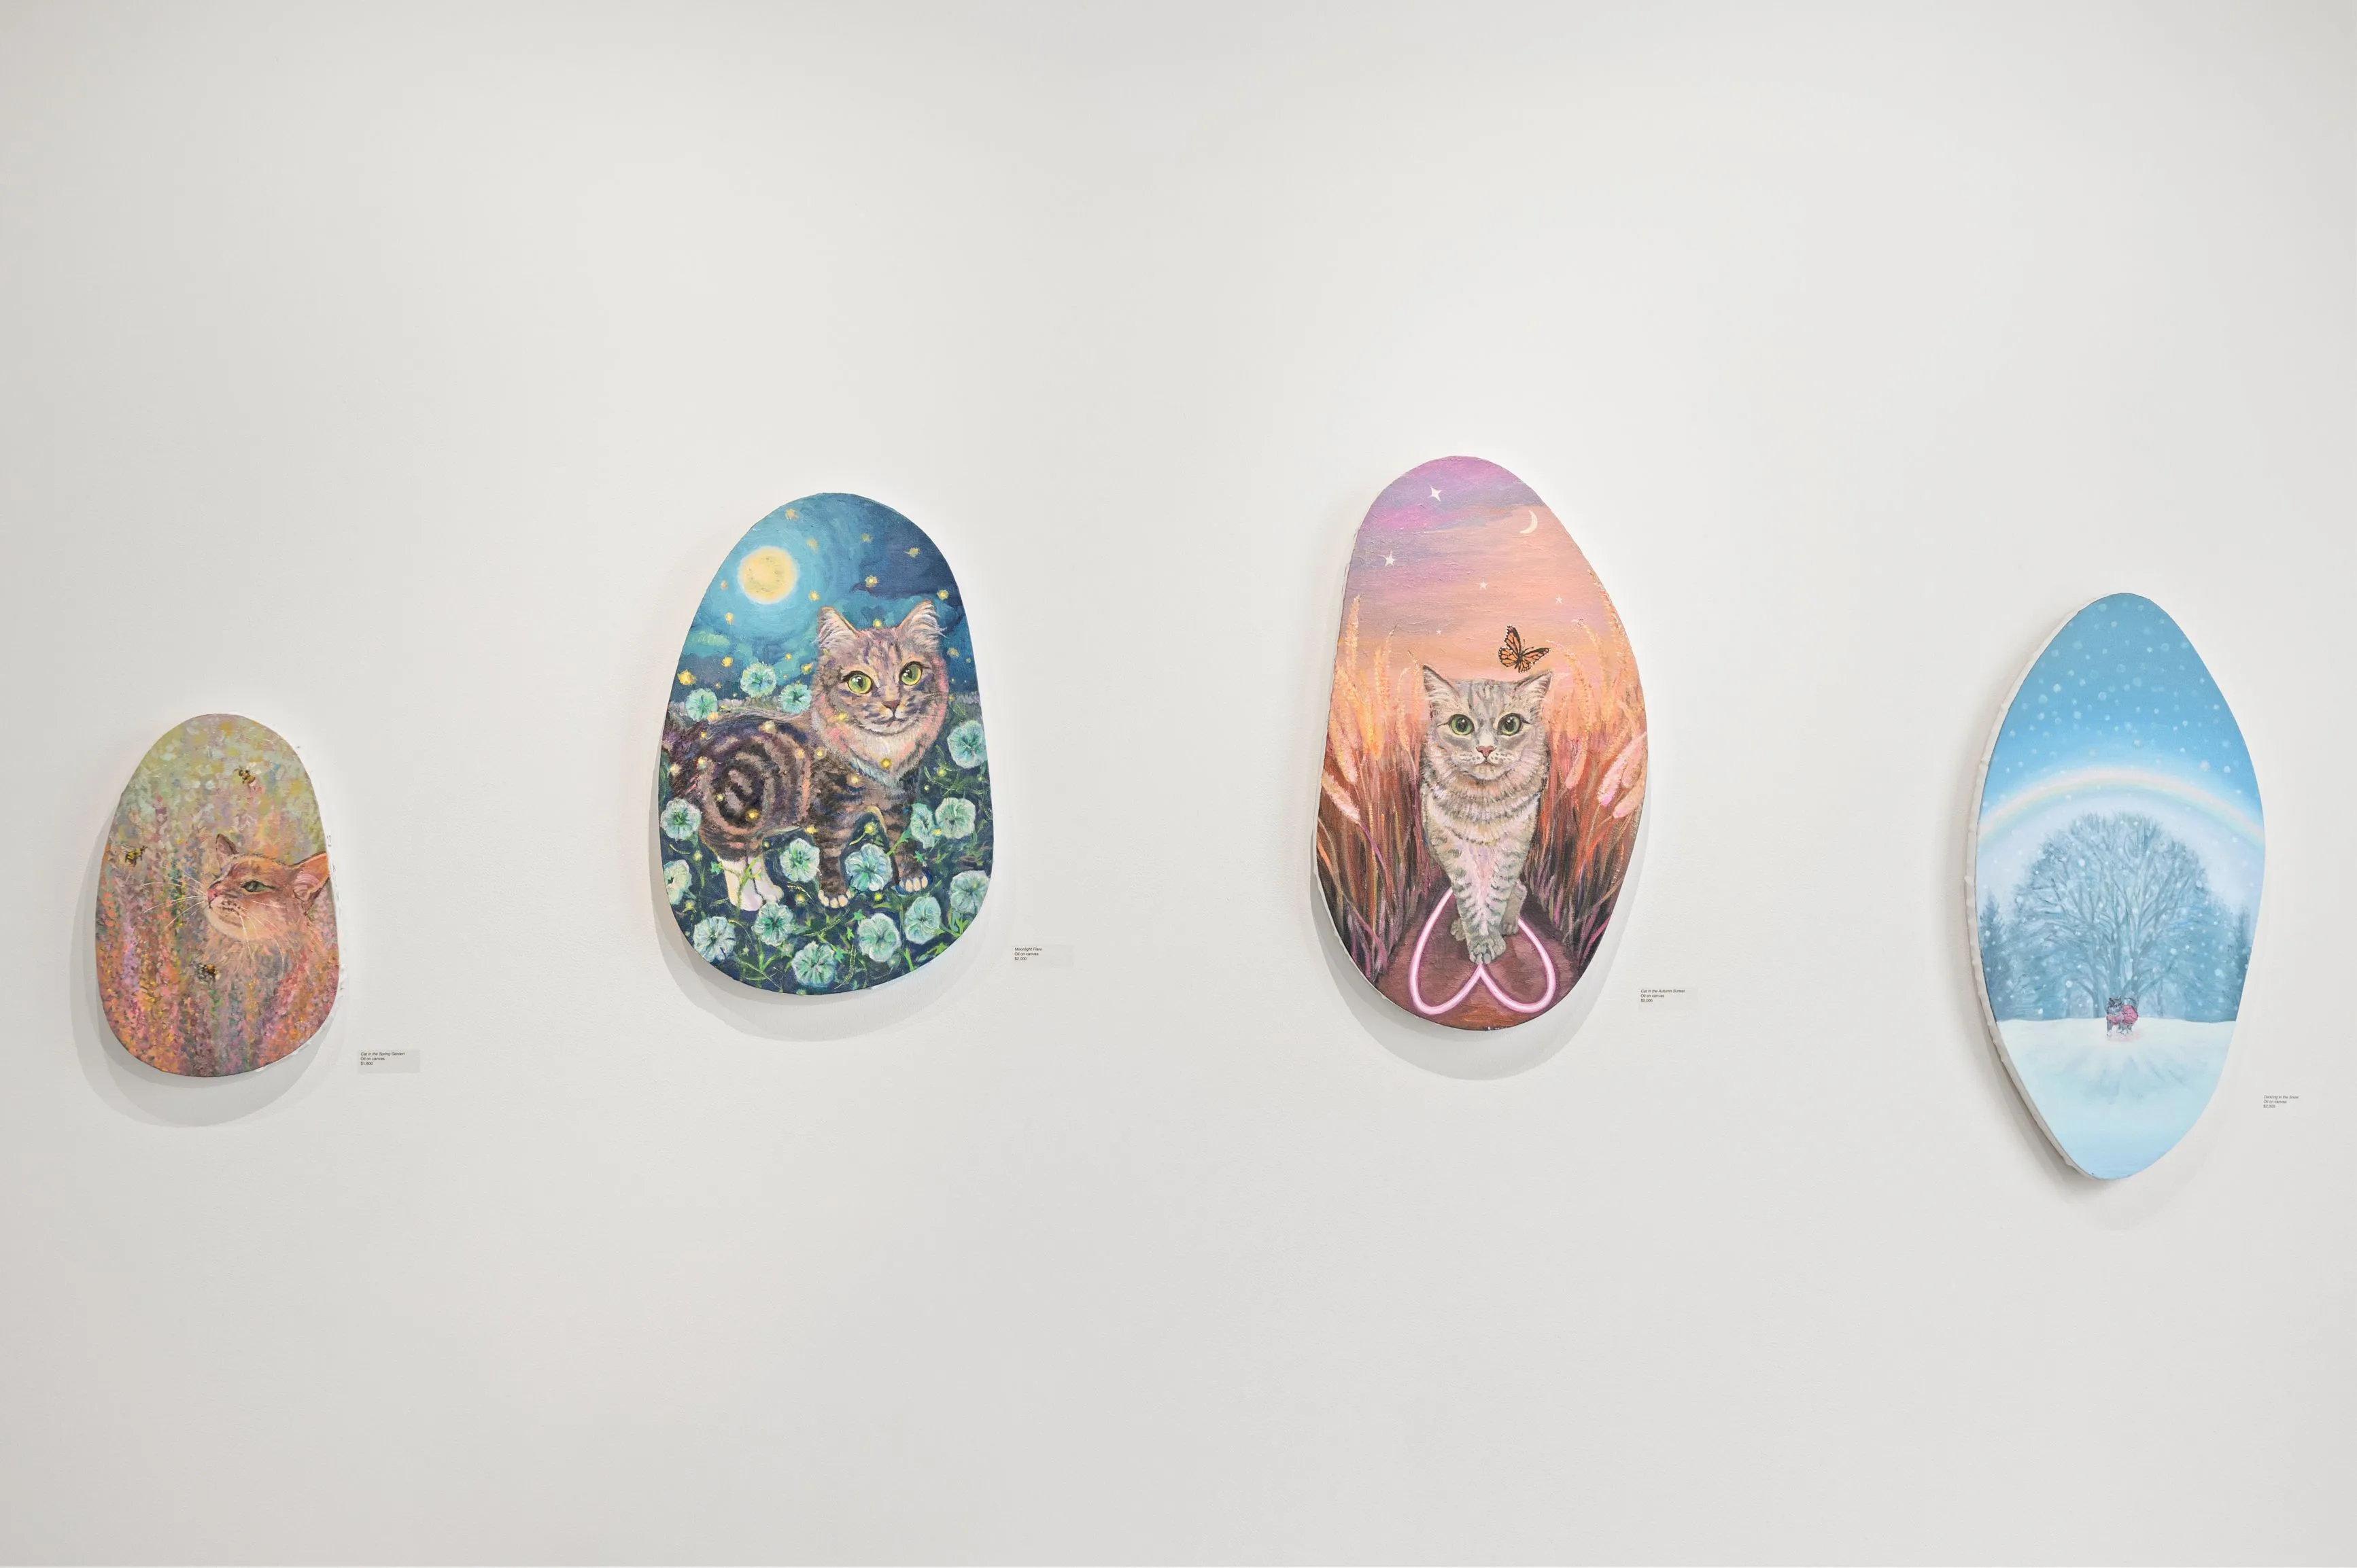 Four decorative Easter eggs with various patterns and illustrations displayed on a white wall.